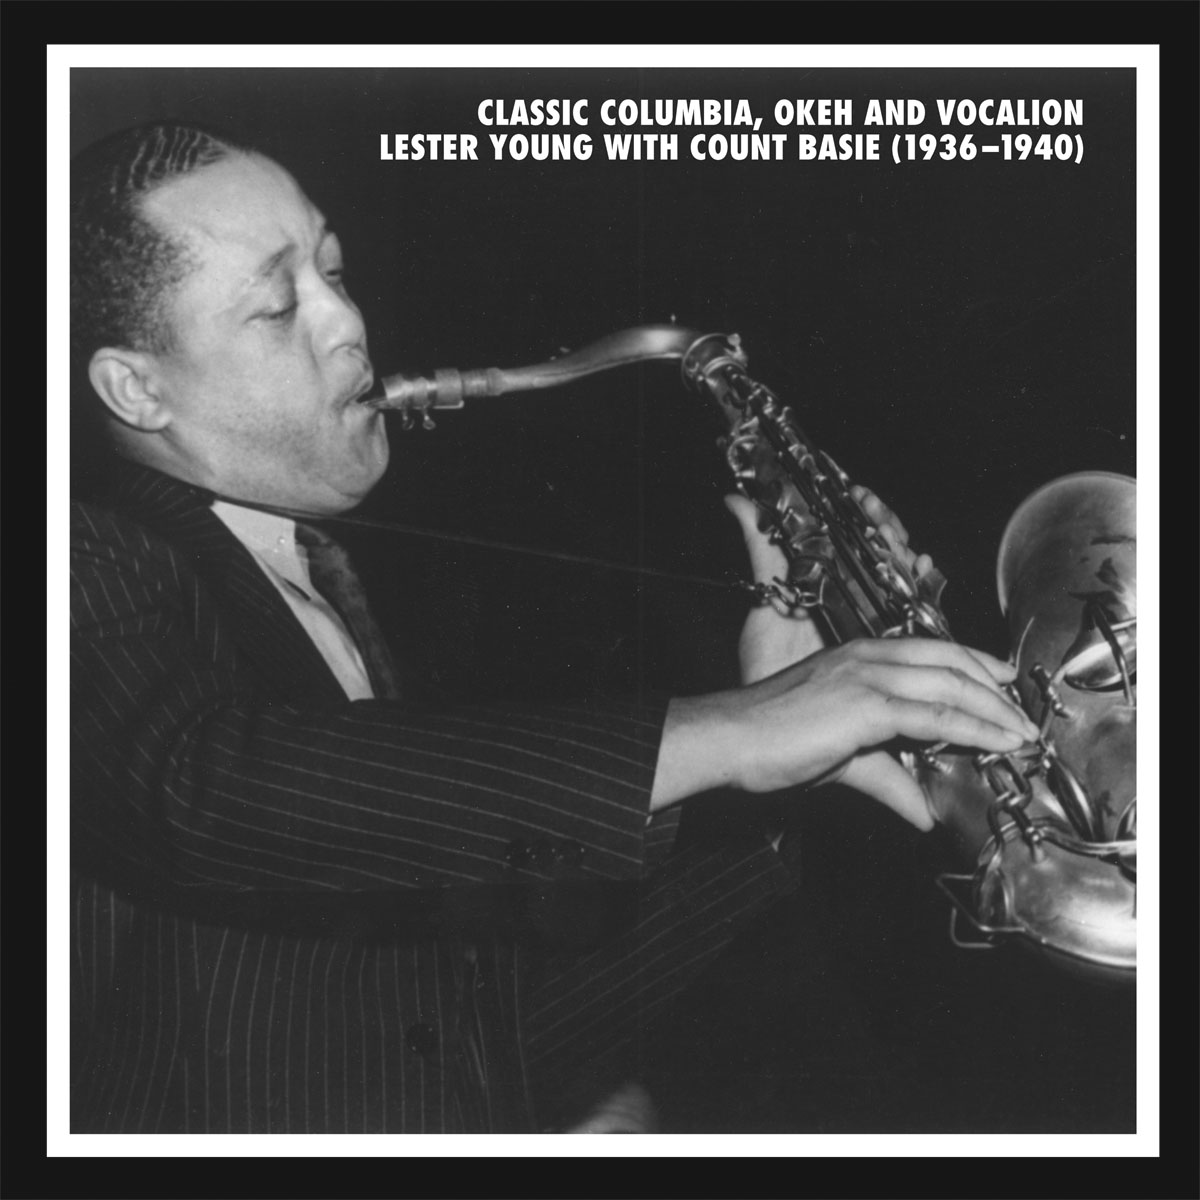 Classic Columbia, OKeh and Vocalian Lester Young with Count Basie 1936-1940